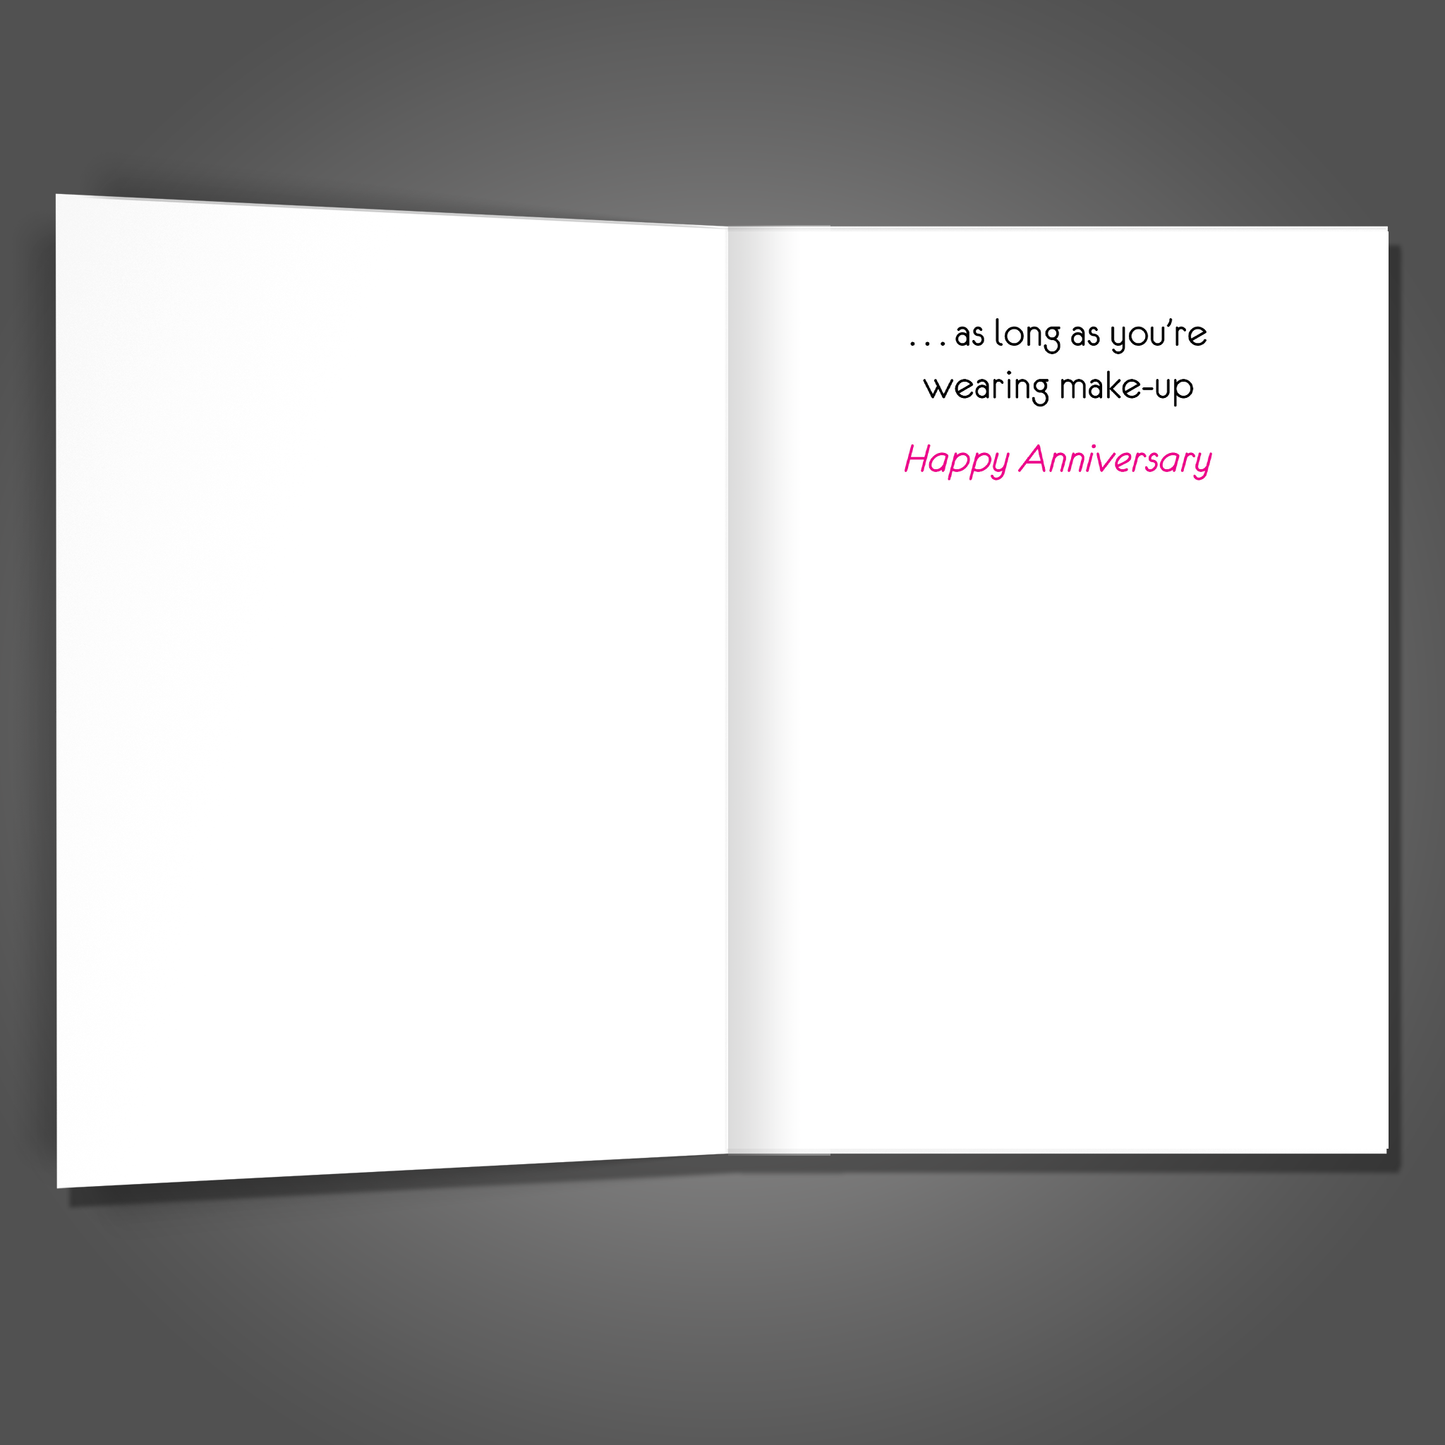 Beautiful Only with Make-Up, Anniversary Card